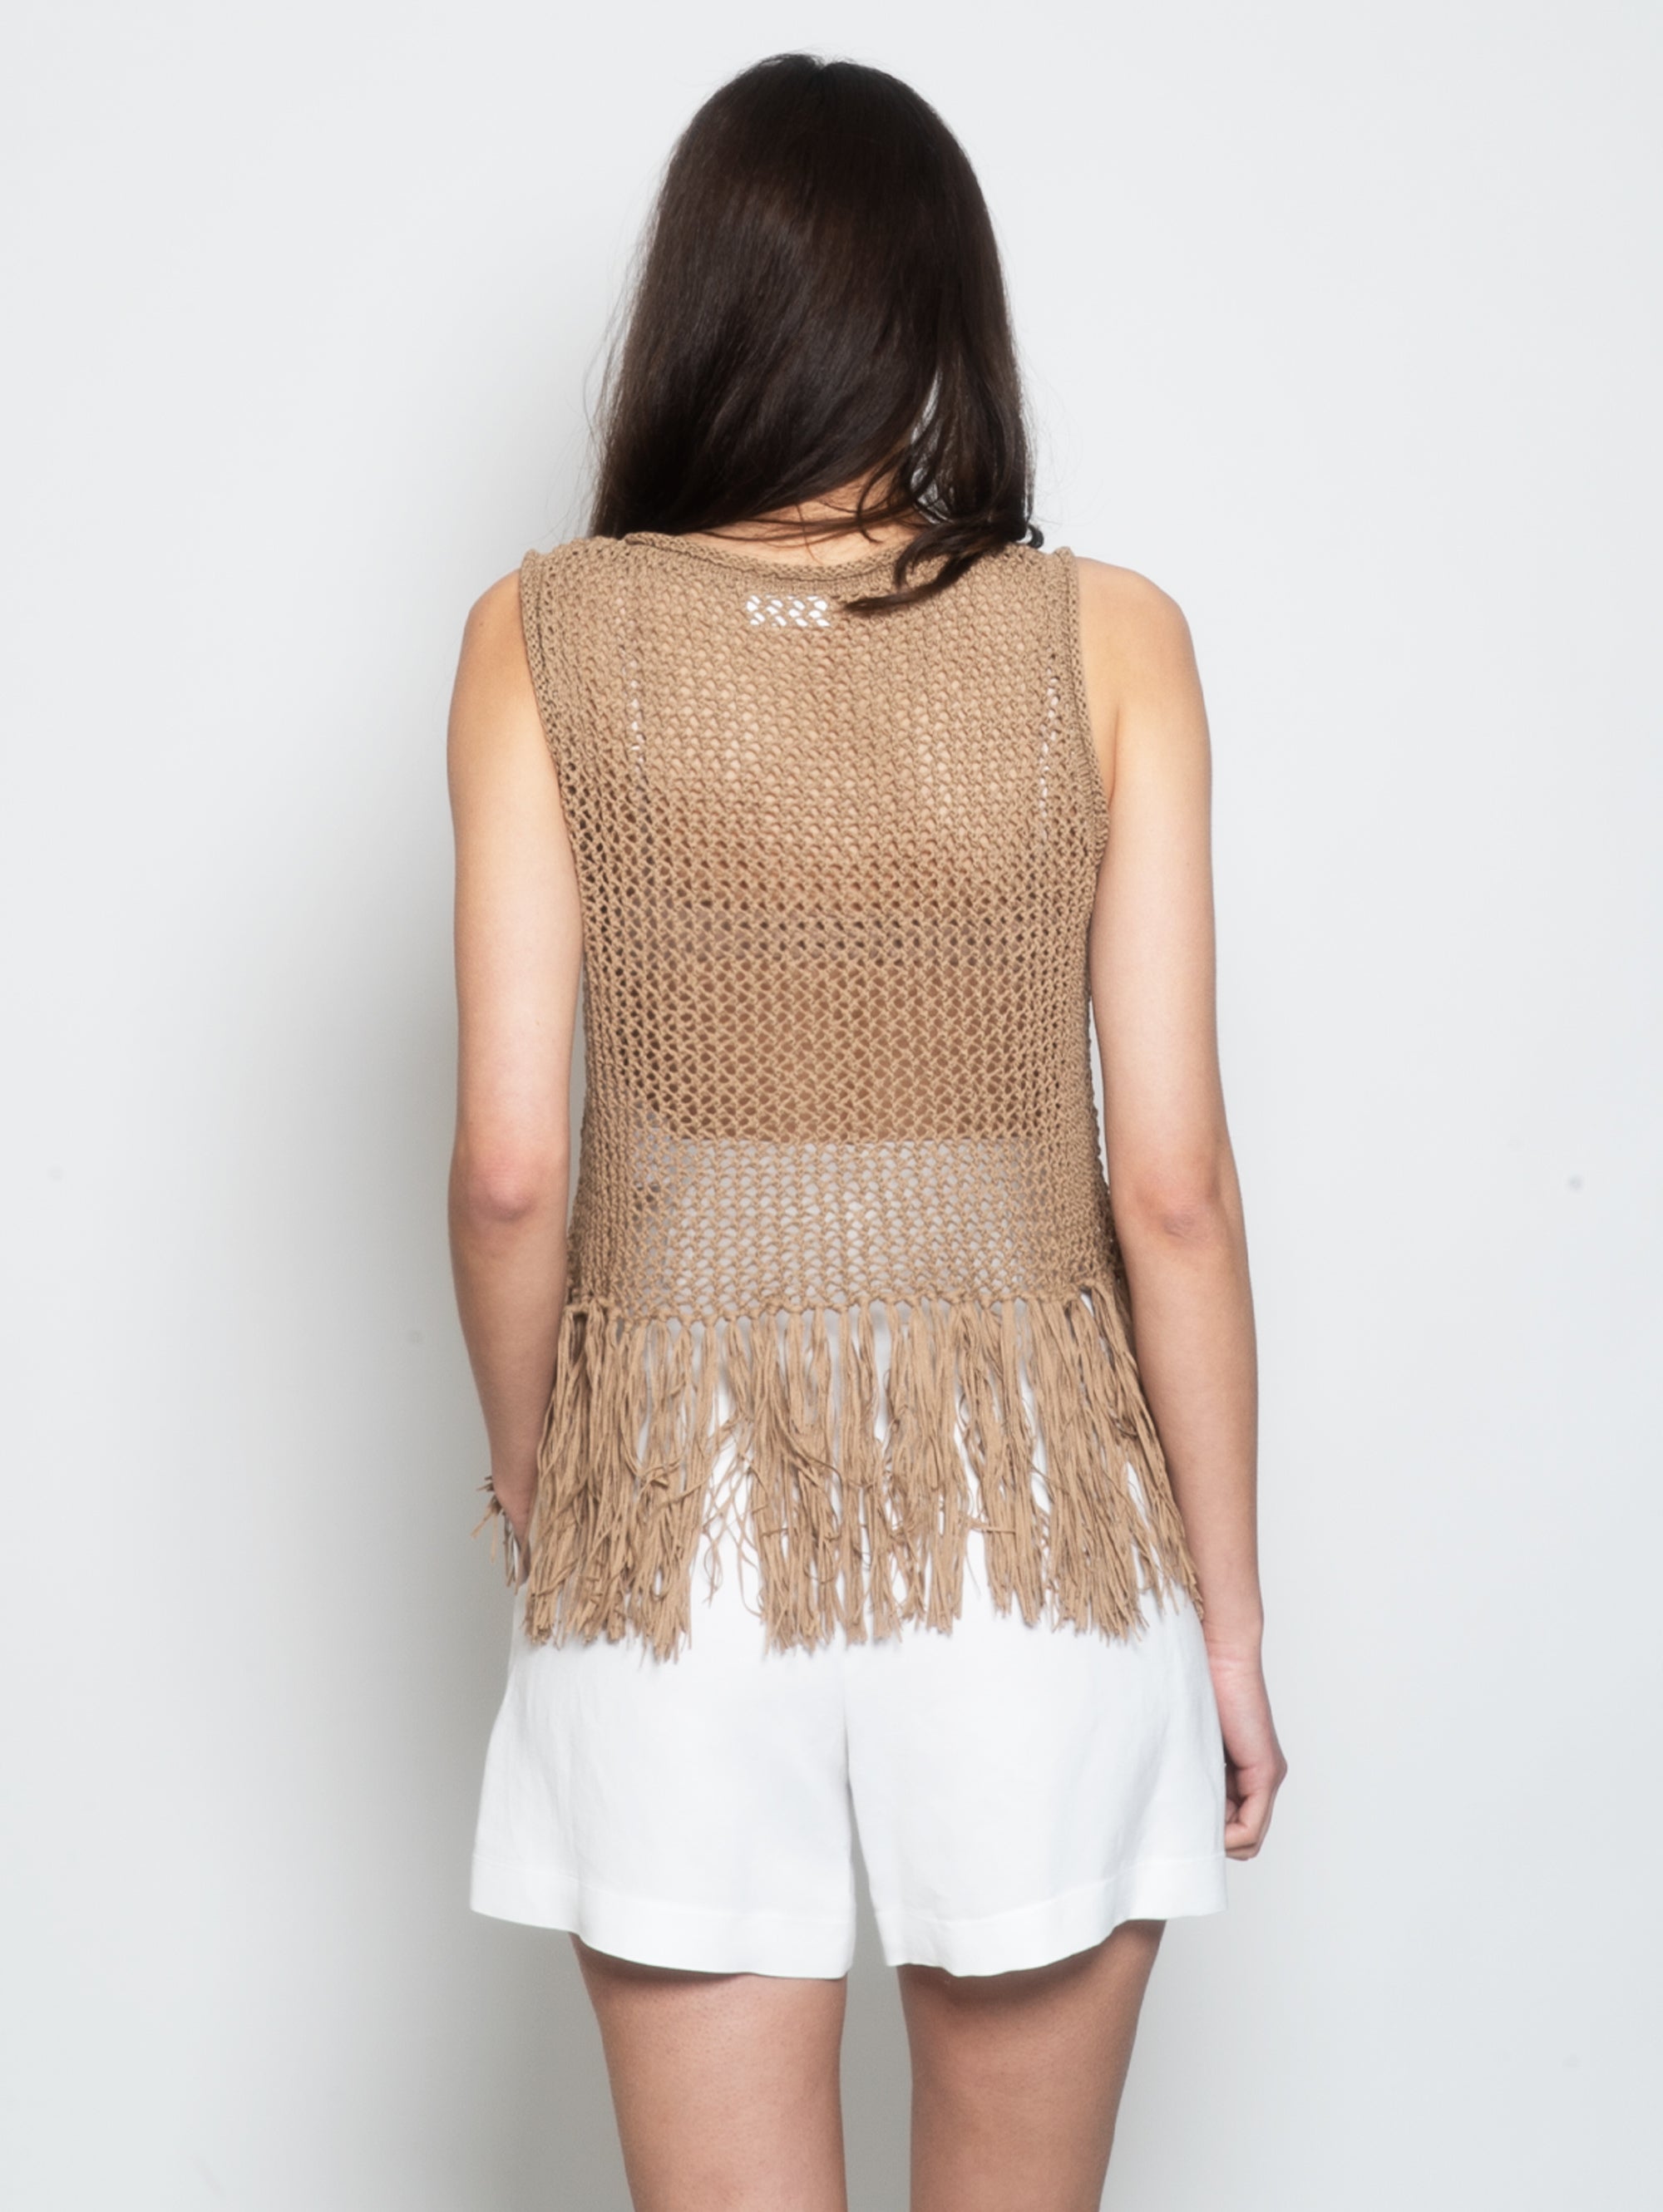 Crochet Knit Top with Sand Fringes